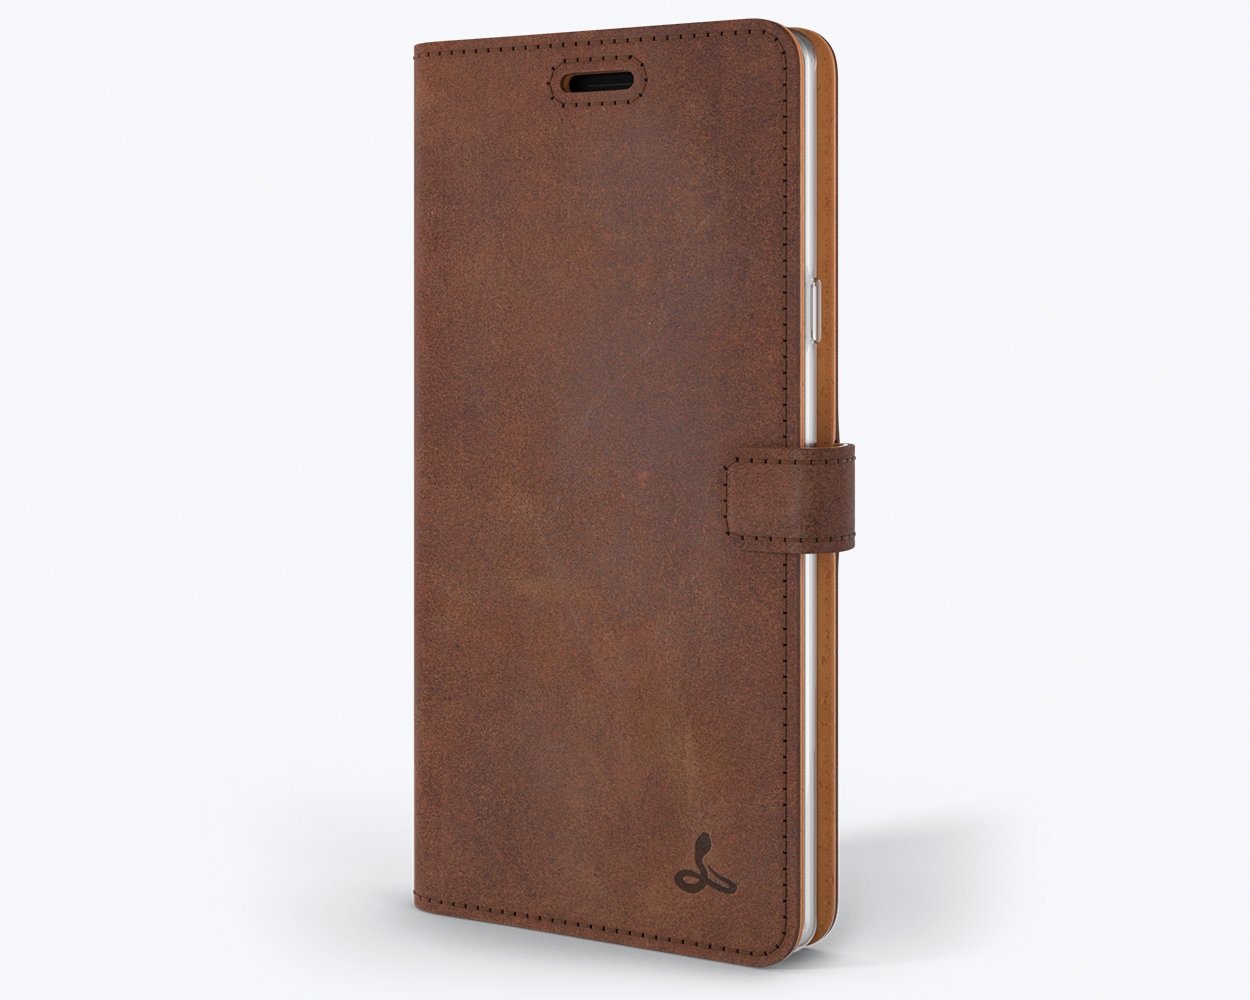 Vintage Leather Wallet - Samsung Galaxy Note 9